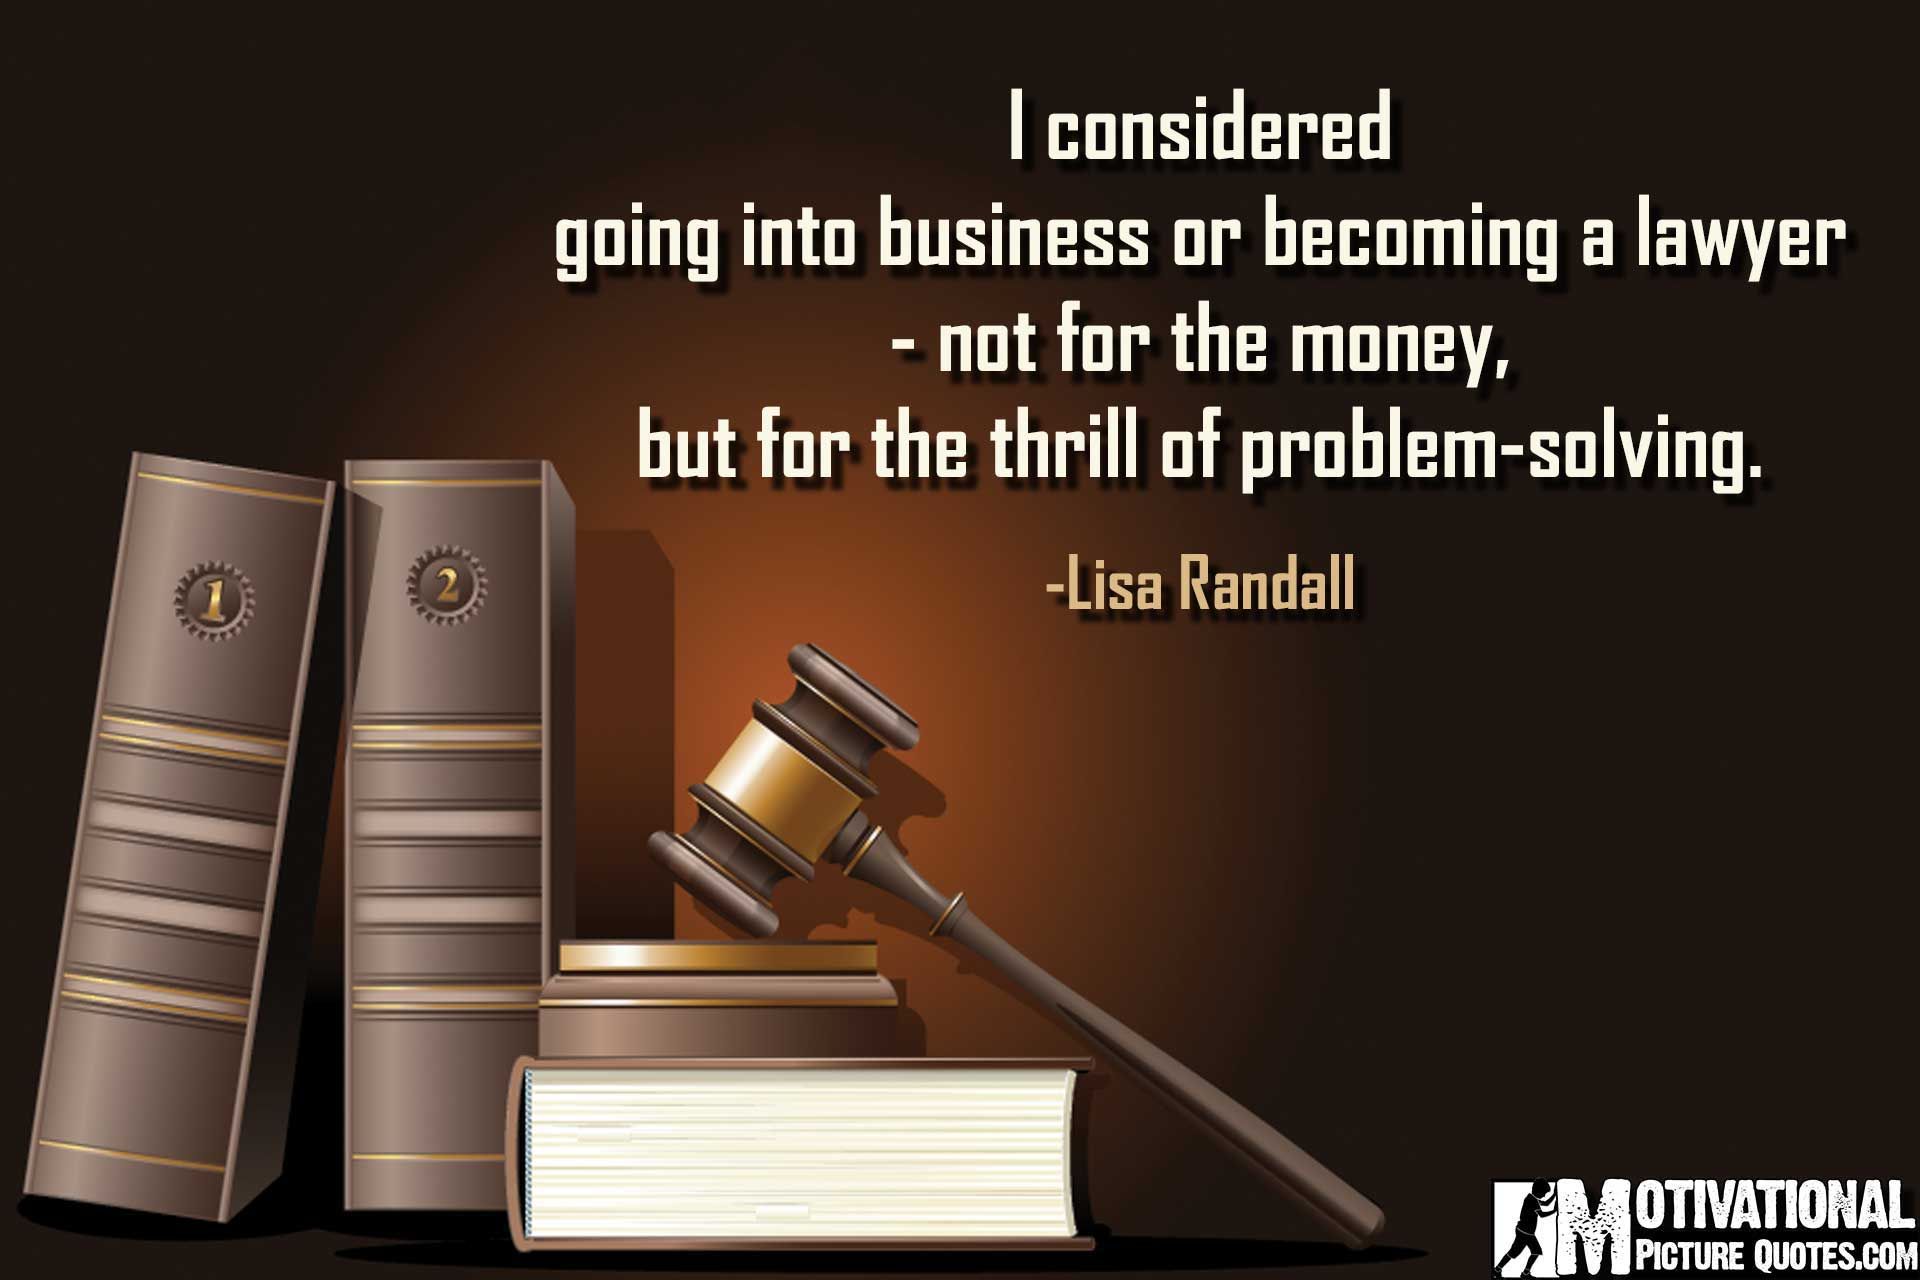 Lawyer Quotes Wallpaper Background. Lawyer quotes, Attorney quotes, Law quotes